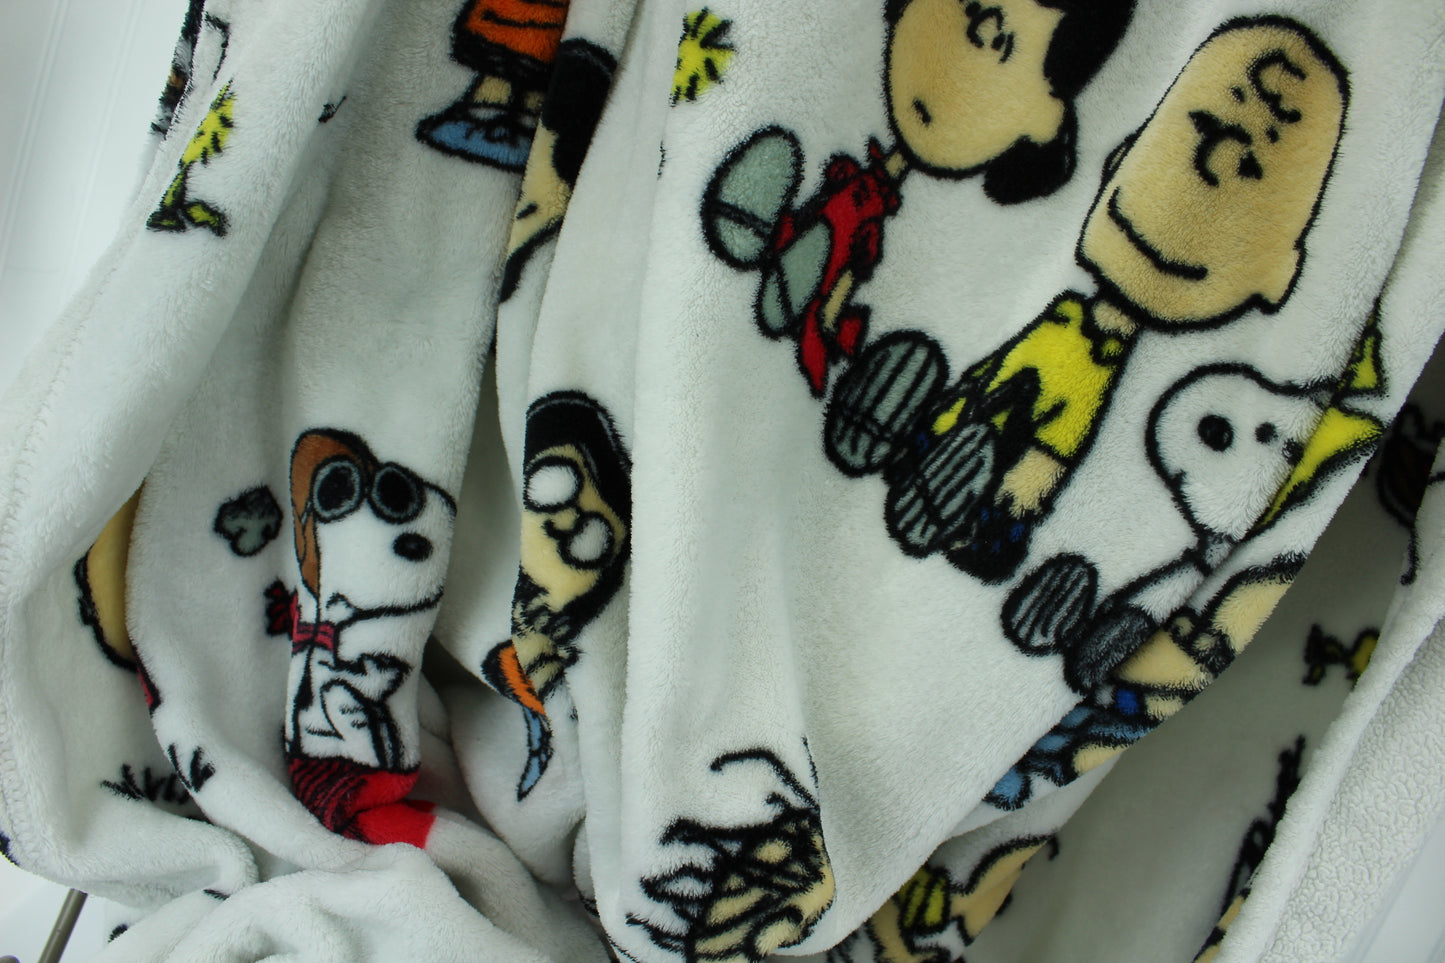 Peanuts Gang Polyester Plush Bed Size Large Blanket  Berkshire 2017 - 85" X 86" all the gang in one blanket